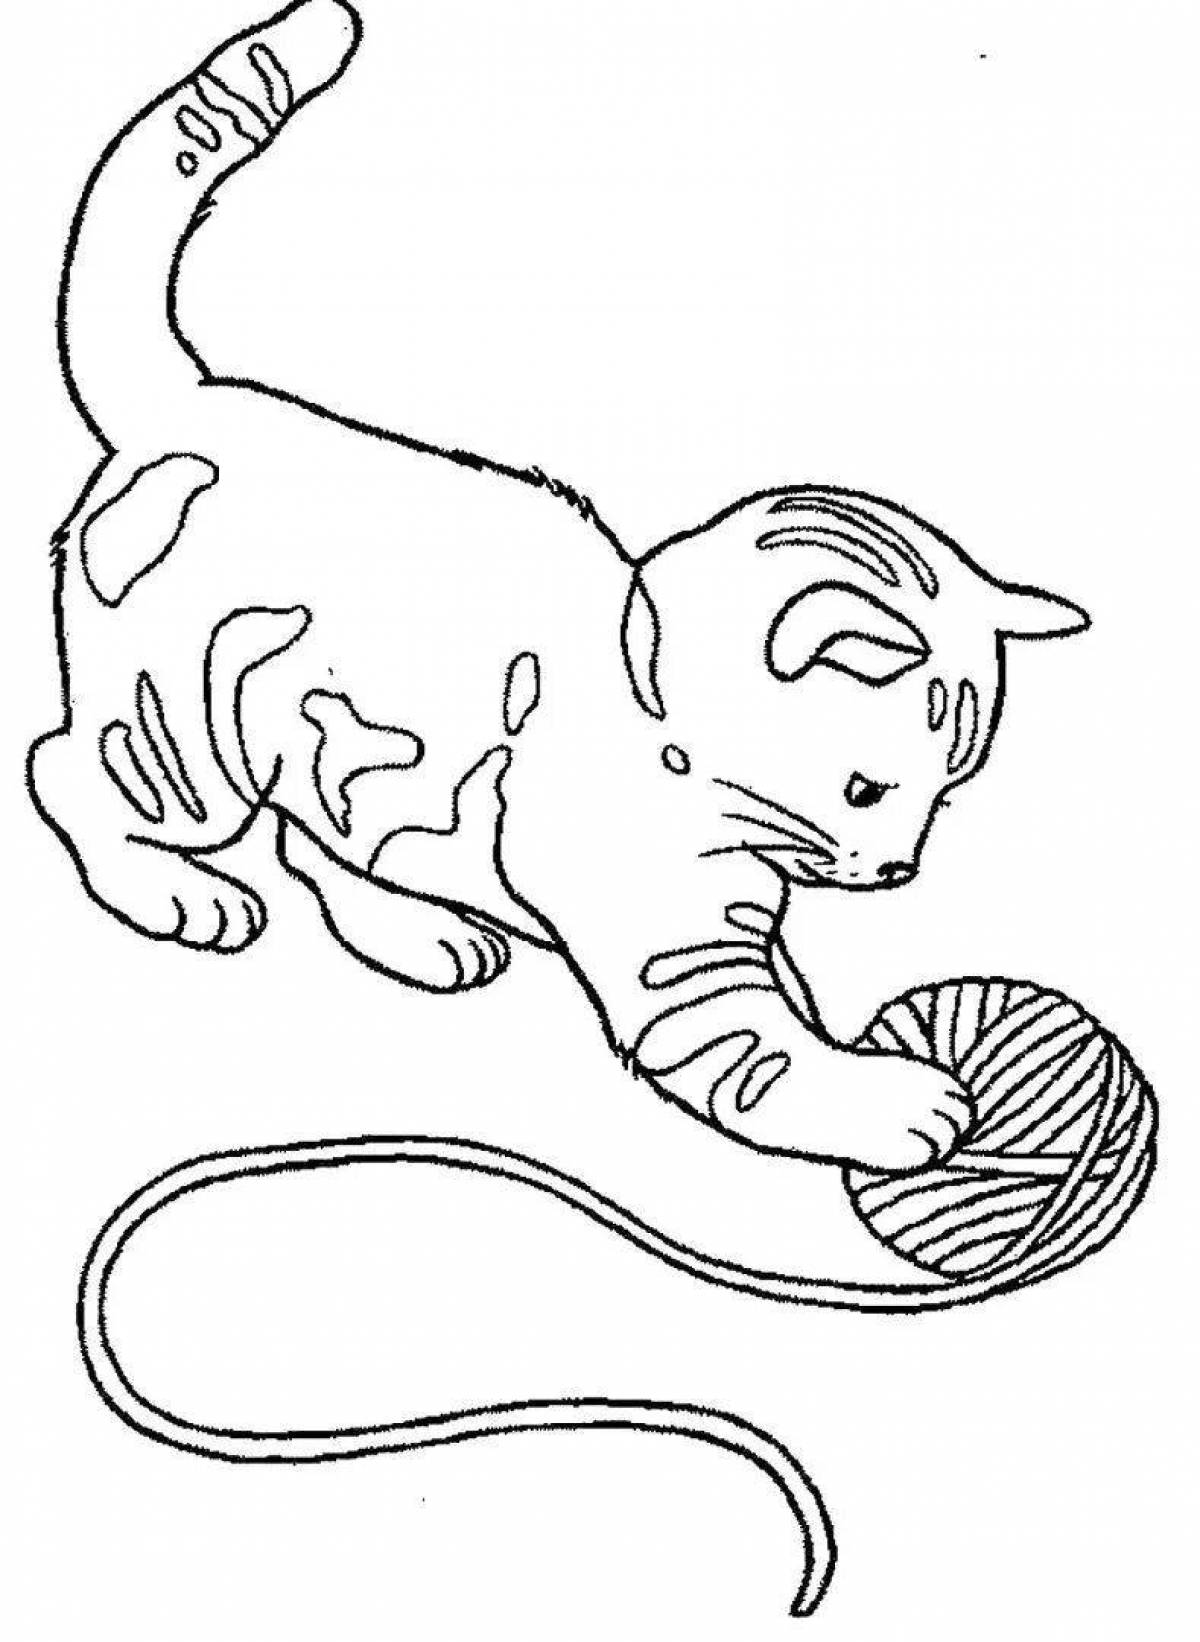 Coloring page energetic cat with a ball